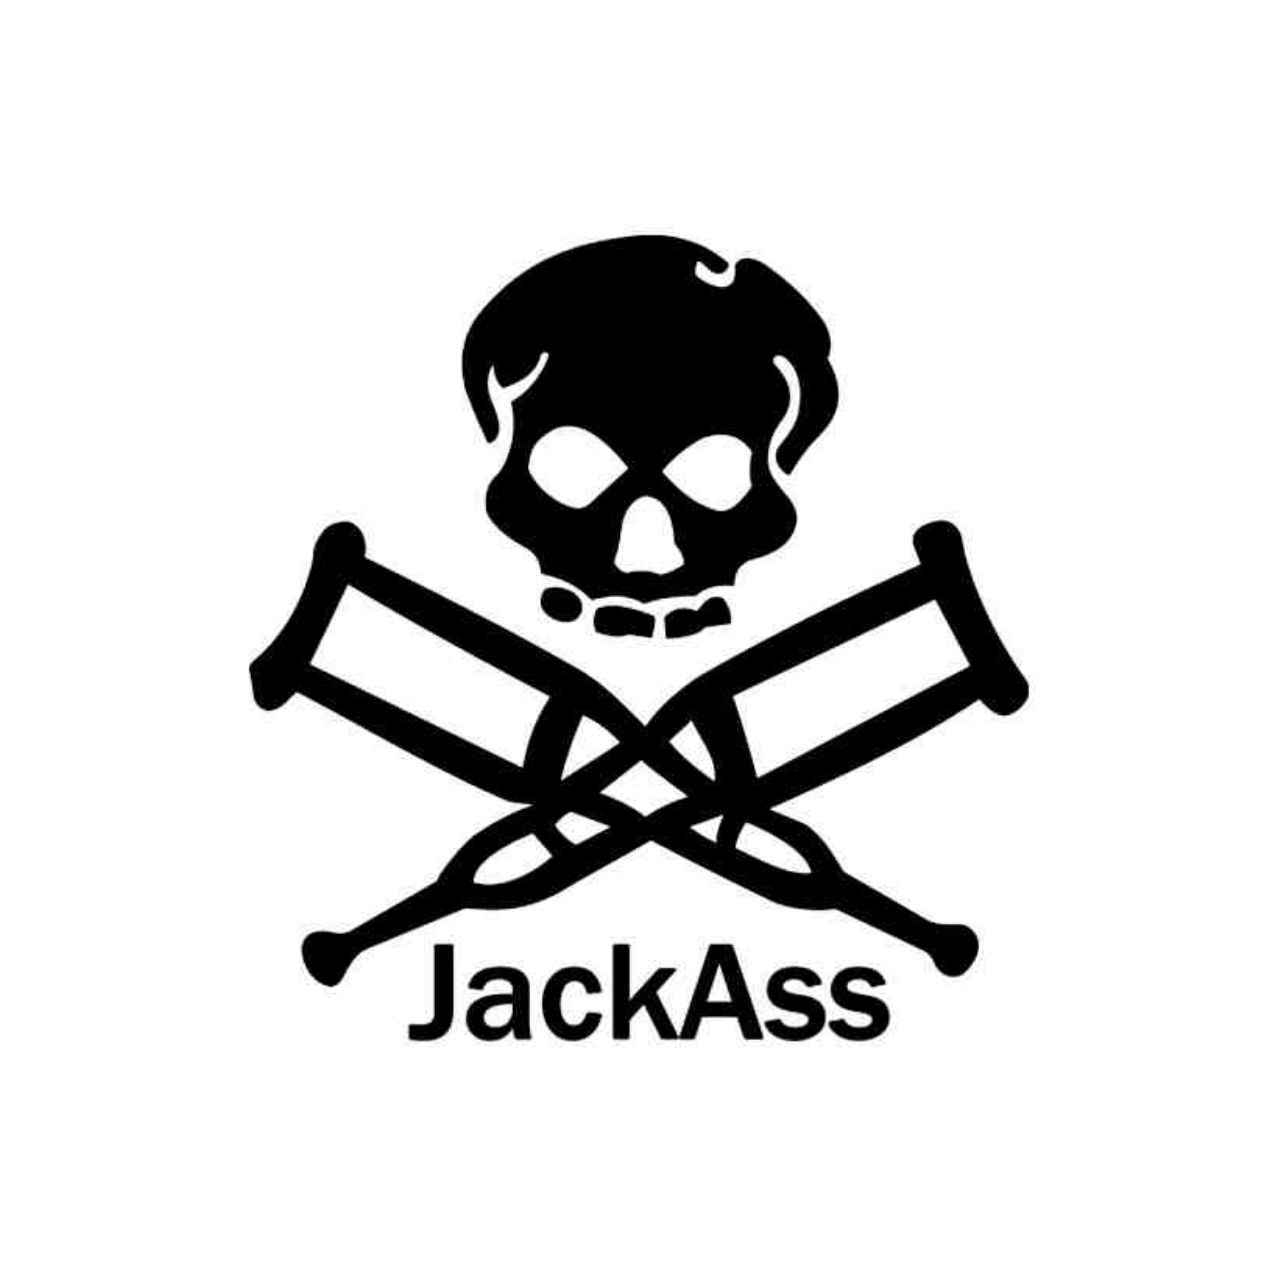 Jackass investing ebook 2nd cryptocurrency after bitcoin